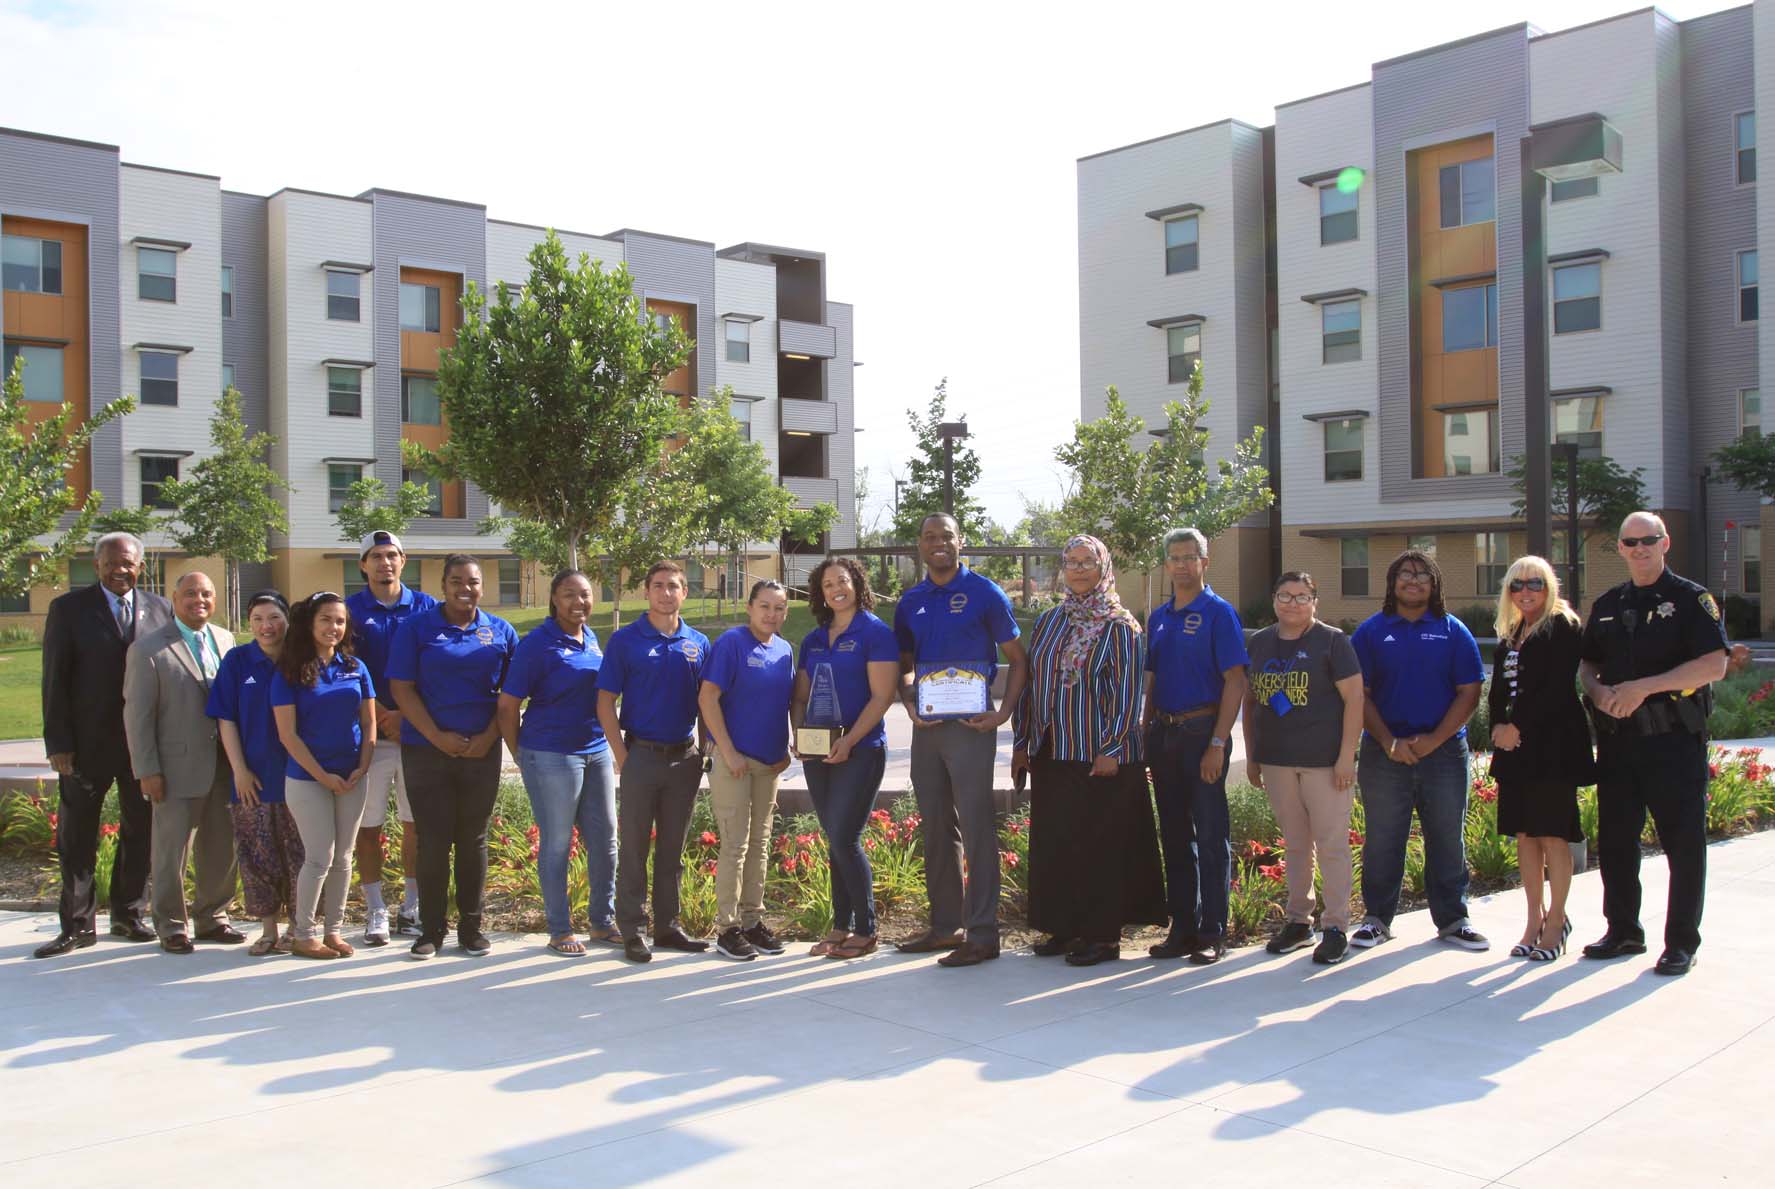 Student Housing recieveing Most Beautiful Area on Campus award